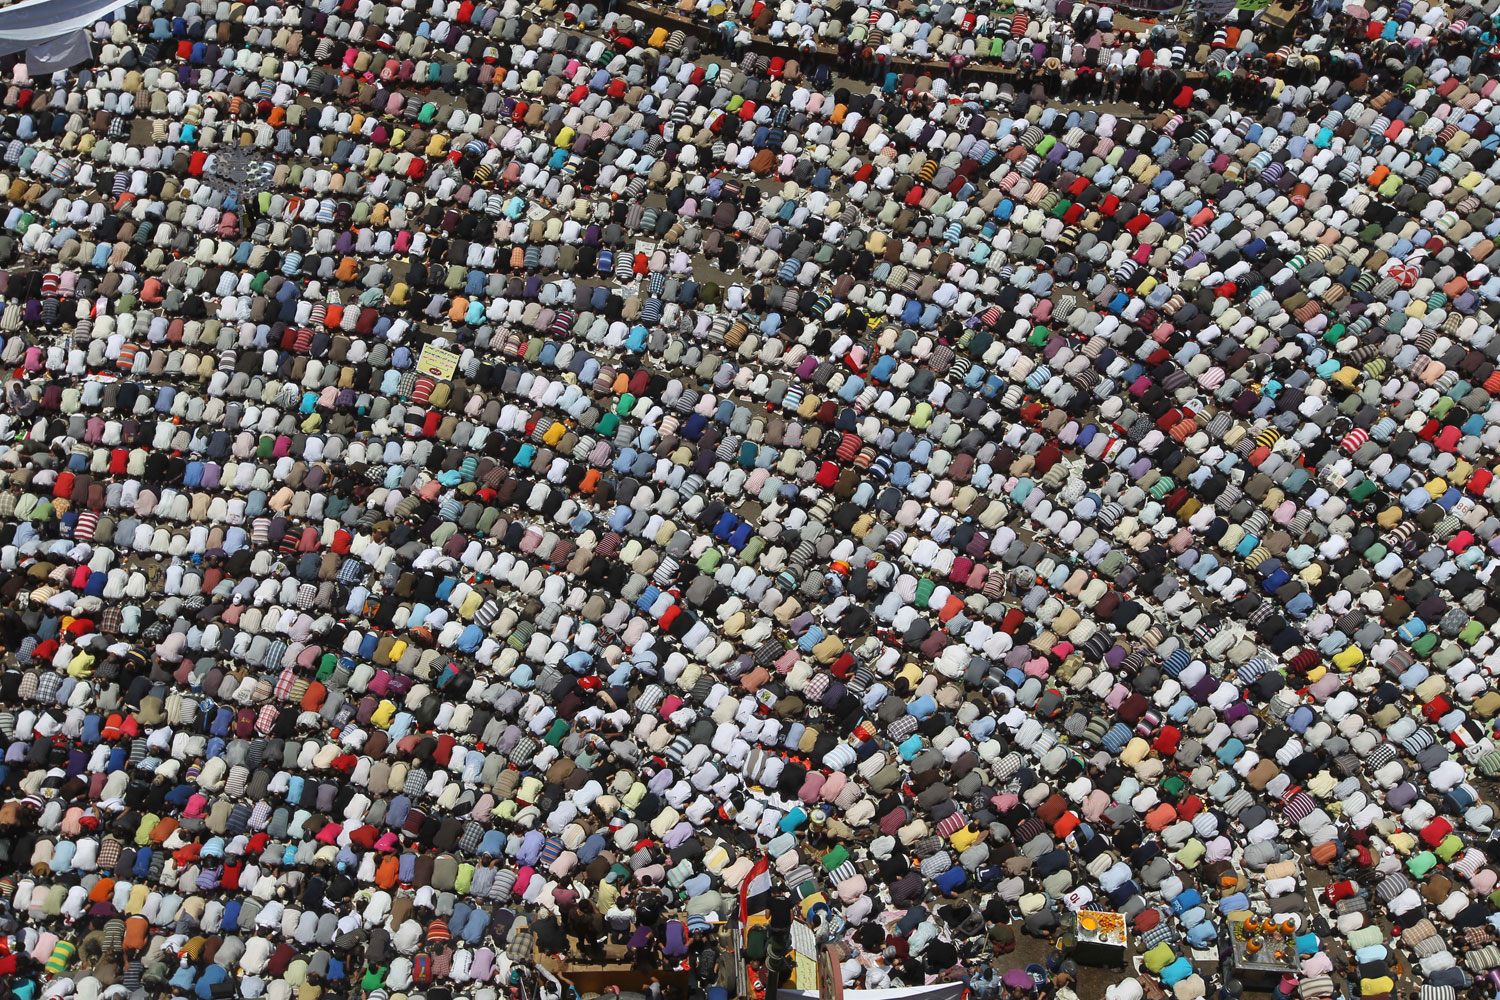 July 8, 2011. Egyptian demonstrators perform the weekly Friday prayer before a rally in downtown Cairo's Tahrir Square. Tens of thousands of Egyptians took to the streets across the country to defend the uprising that toppled president Hosni Mubarak, directing their anger at the new military rulers over the slow pace of reform.